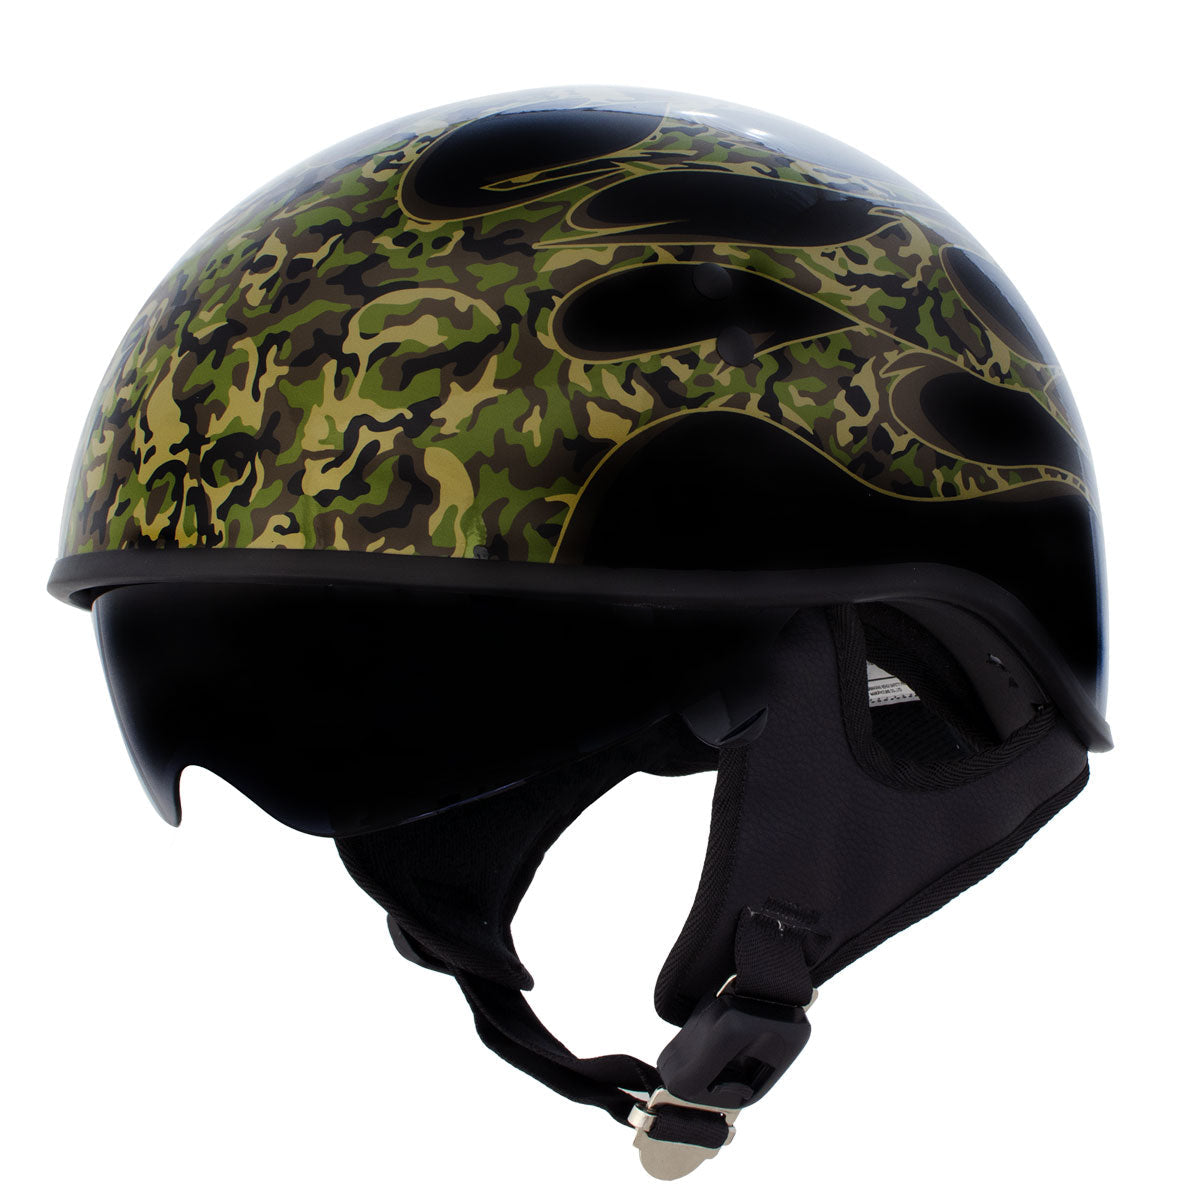 Hot Leathers HLD1047 Gloss Black 'Camo Skull Flames' Advanced DOT Skull Helmet with Drop Down Tinted Visor with Drop Down Tinted Visor